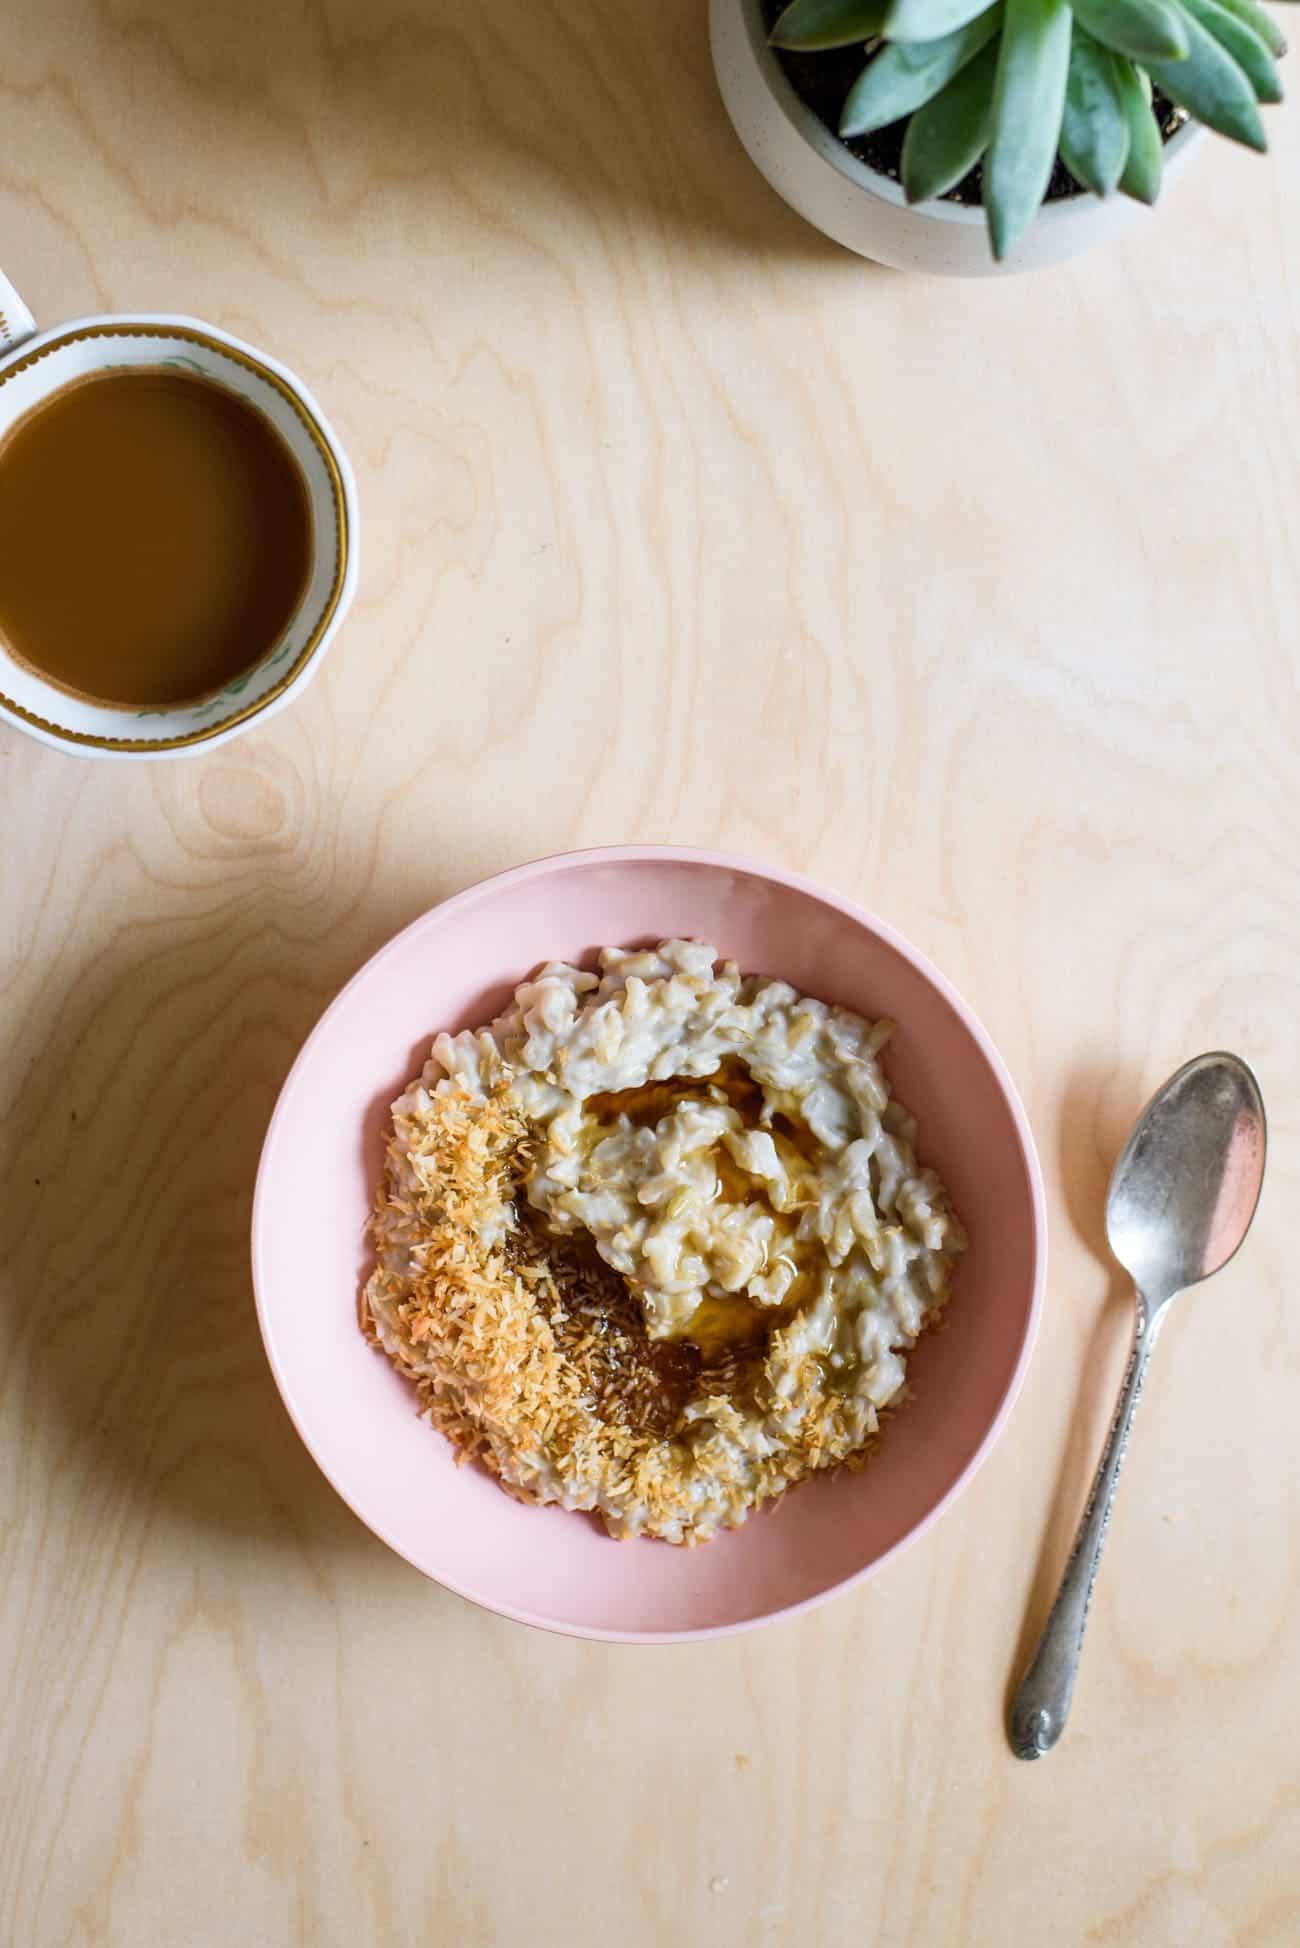 Basmati Rice Pudding with Toasted Coconut Flakes and Maple Syrup in a pink bowl next to coffee and a succulent